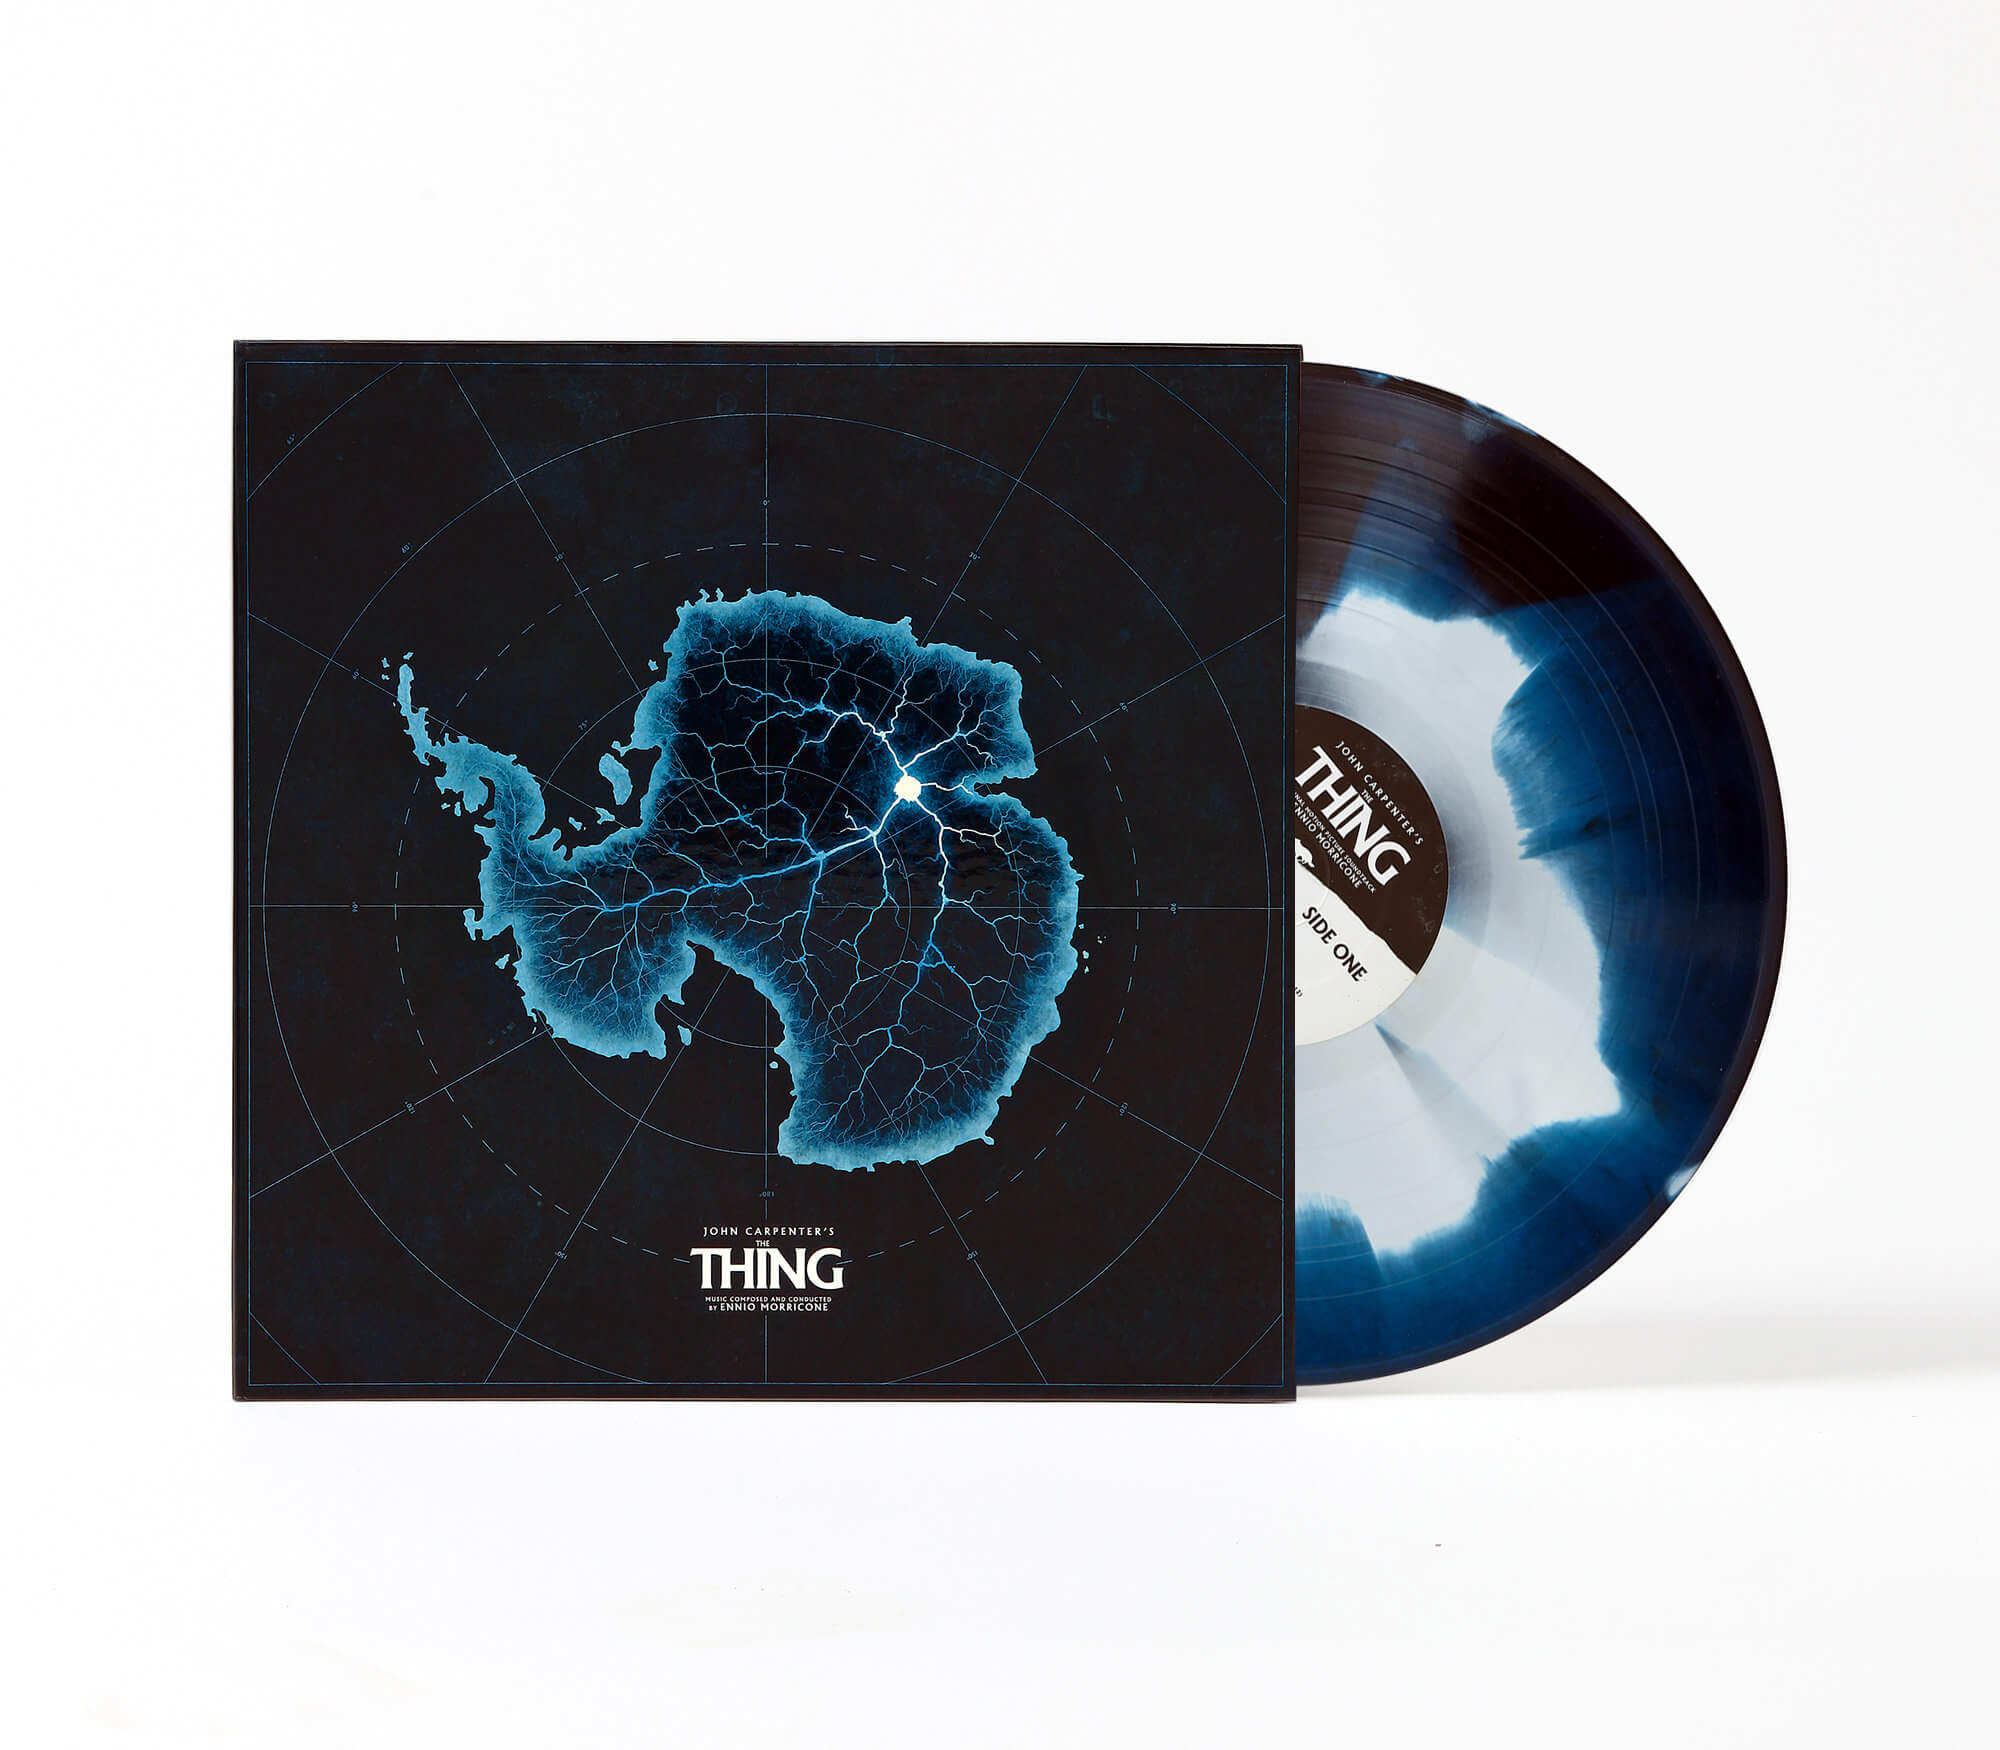 John Carpenter’s THE THING original score by Ennio Morricone deluxe LP re-issued on Waxwork